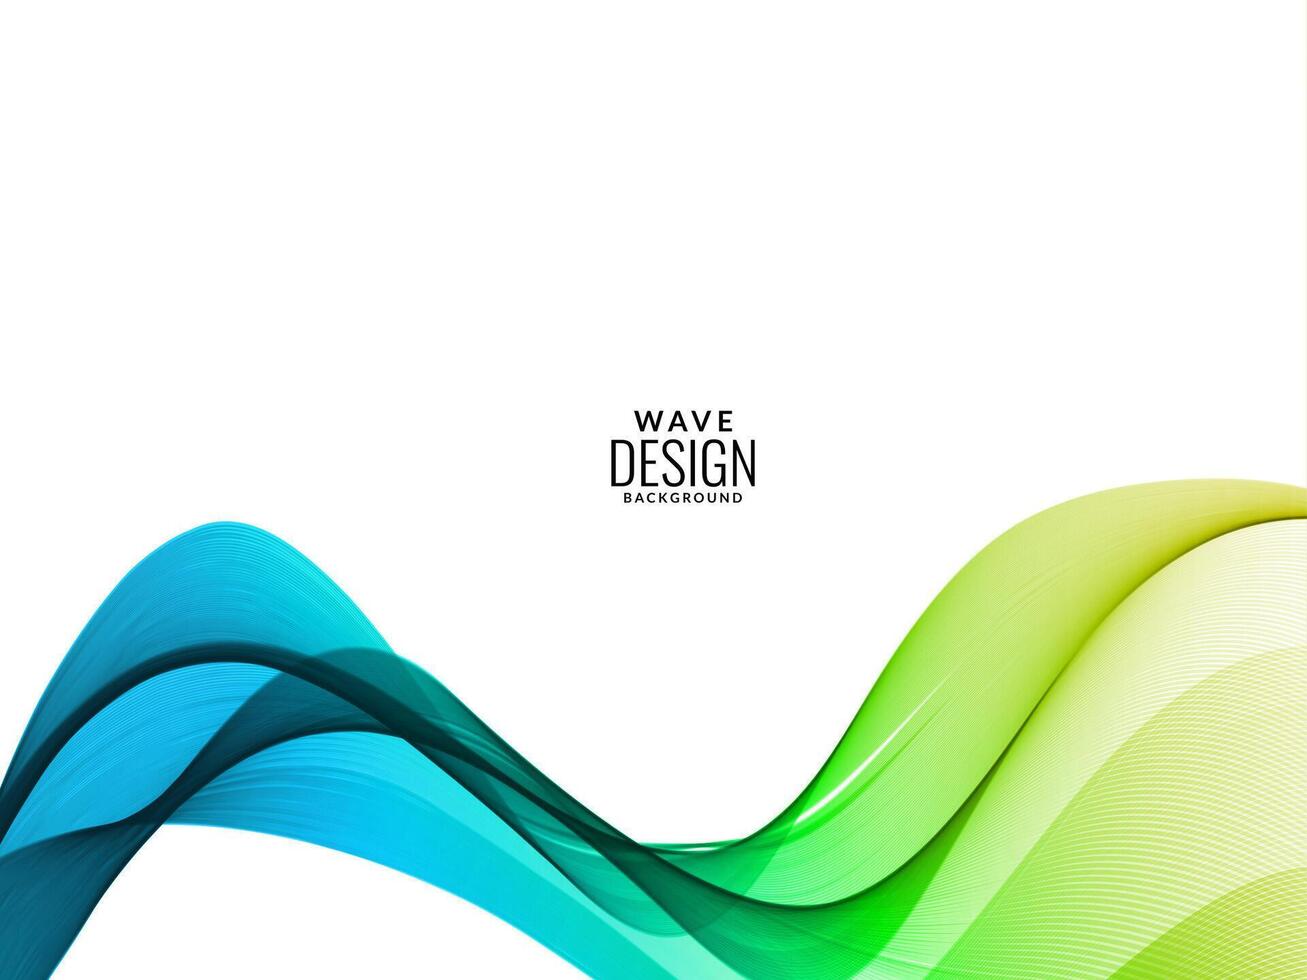 Abstract blue and green colo flowing stylish wave illustration pattern background vector